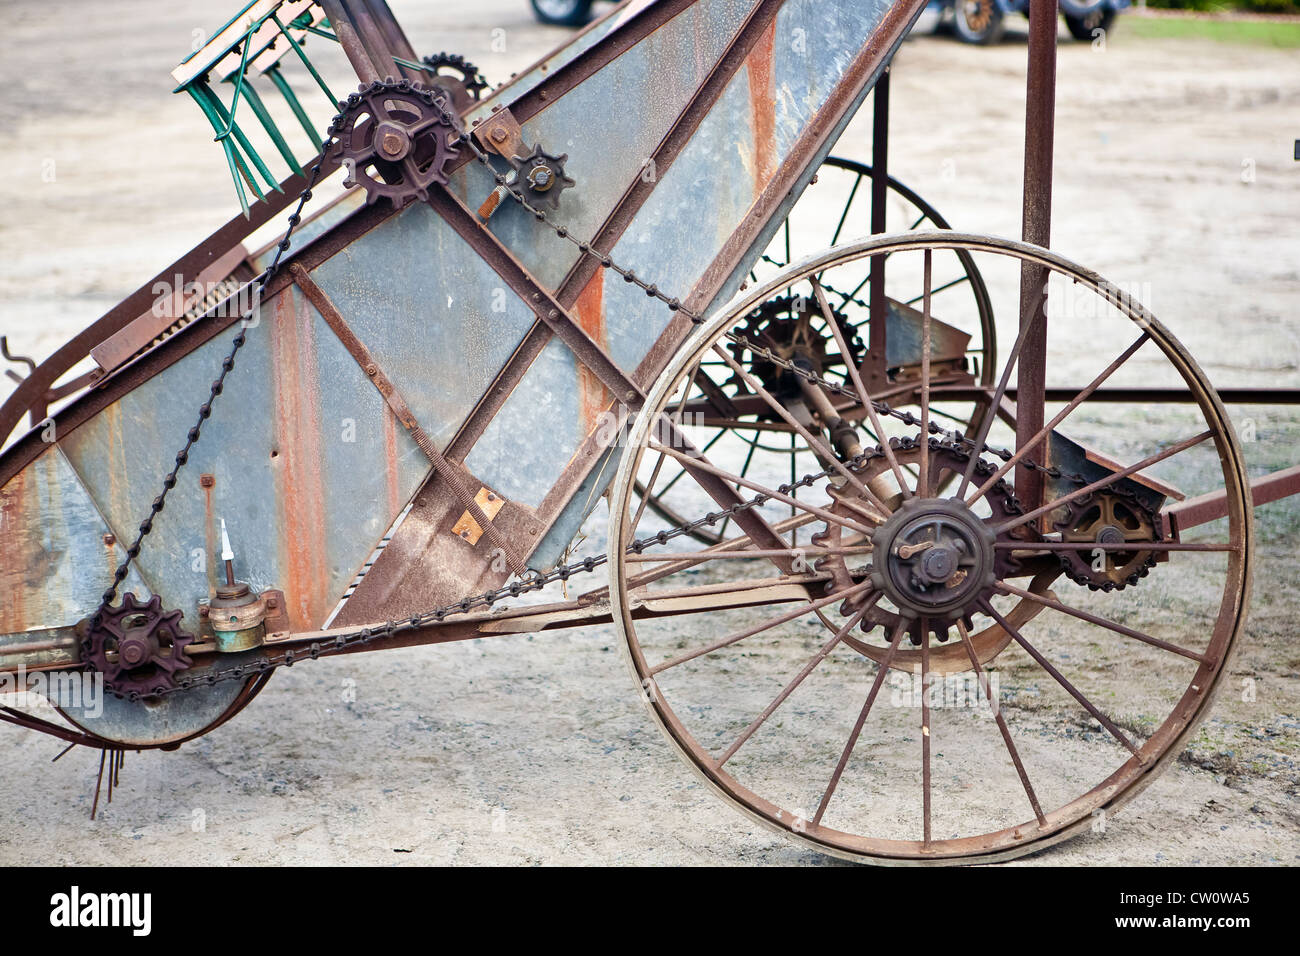 rusty gears and chain drive on antique farm machinery Stock Photo